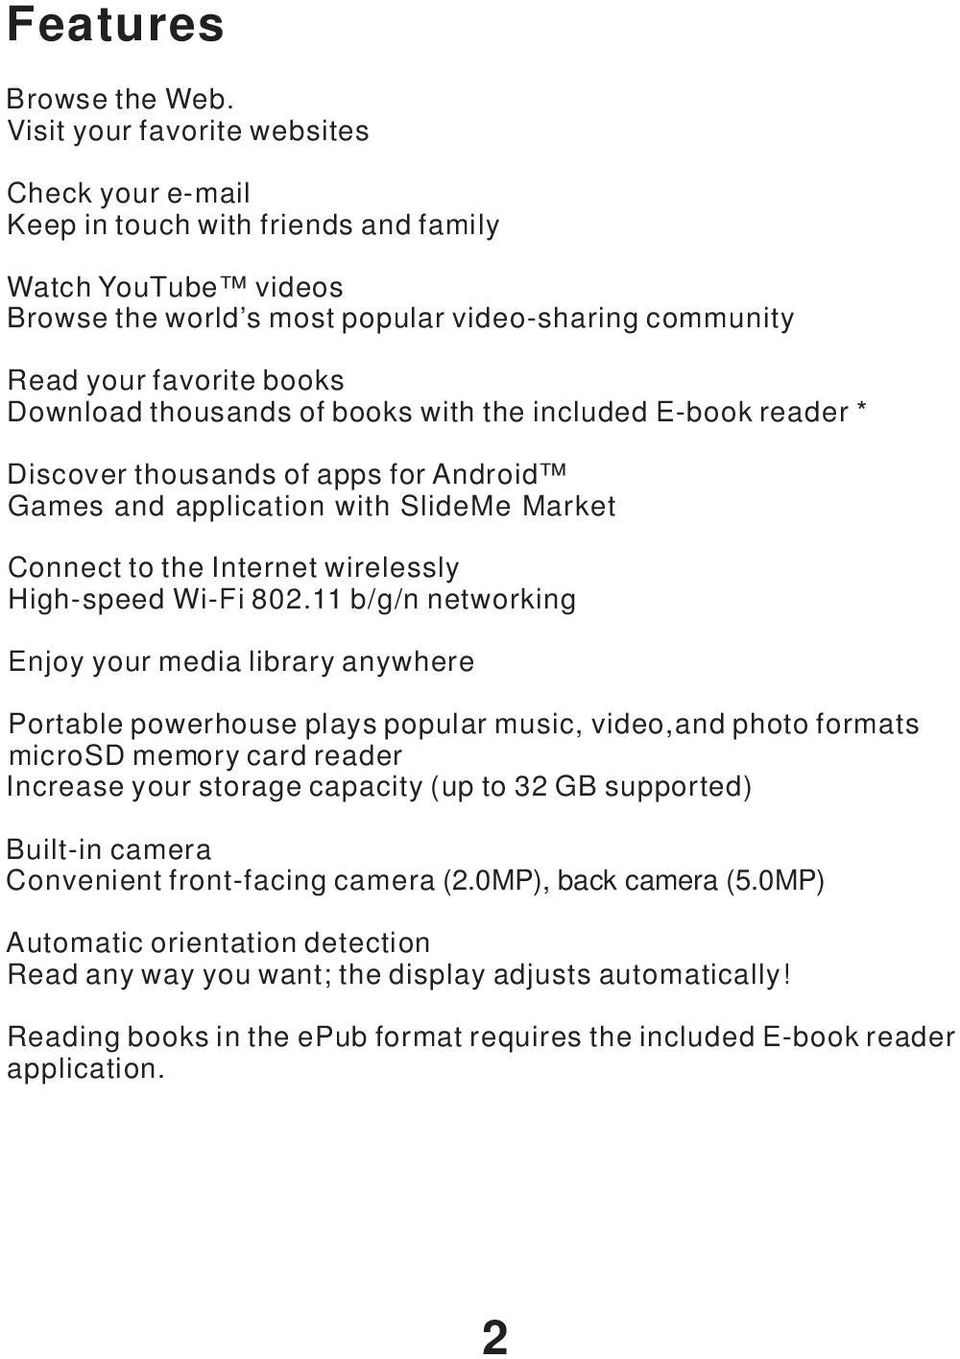 thousands of books with the included E-book reader * Discover thousands of apps for Android Games and application with SlideMe Market Connect to the Internet wirelessly High-speed Wi-Fi 802.